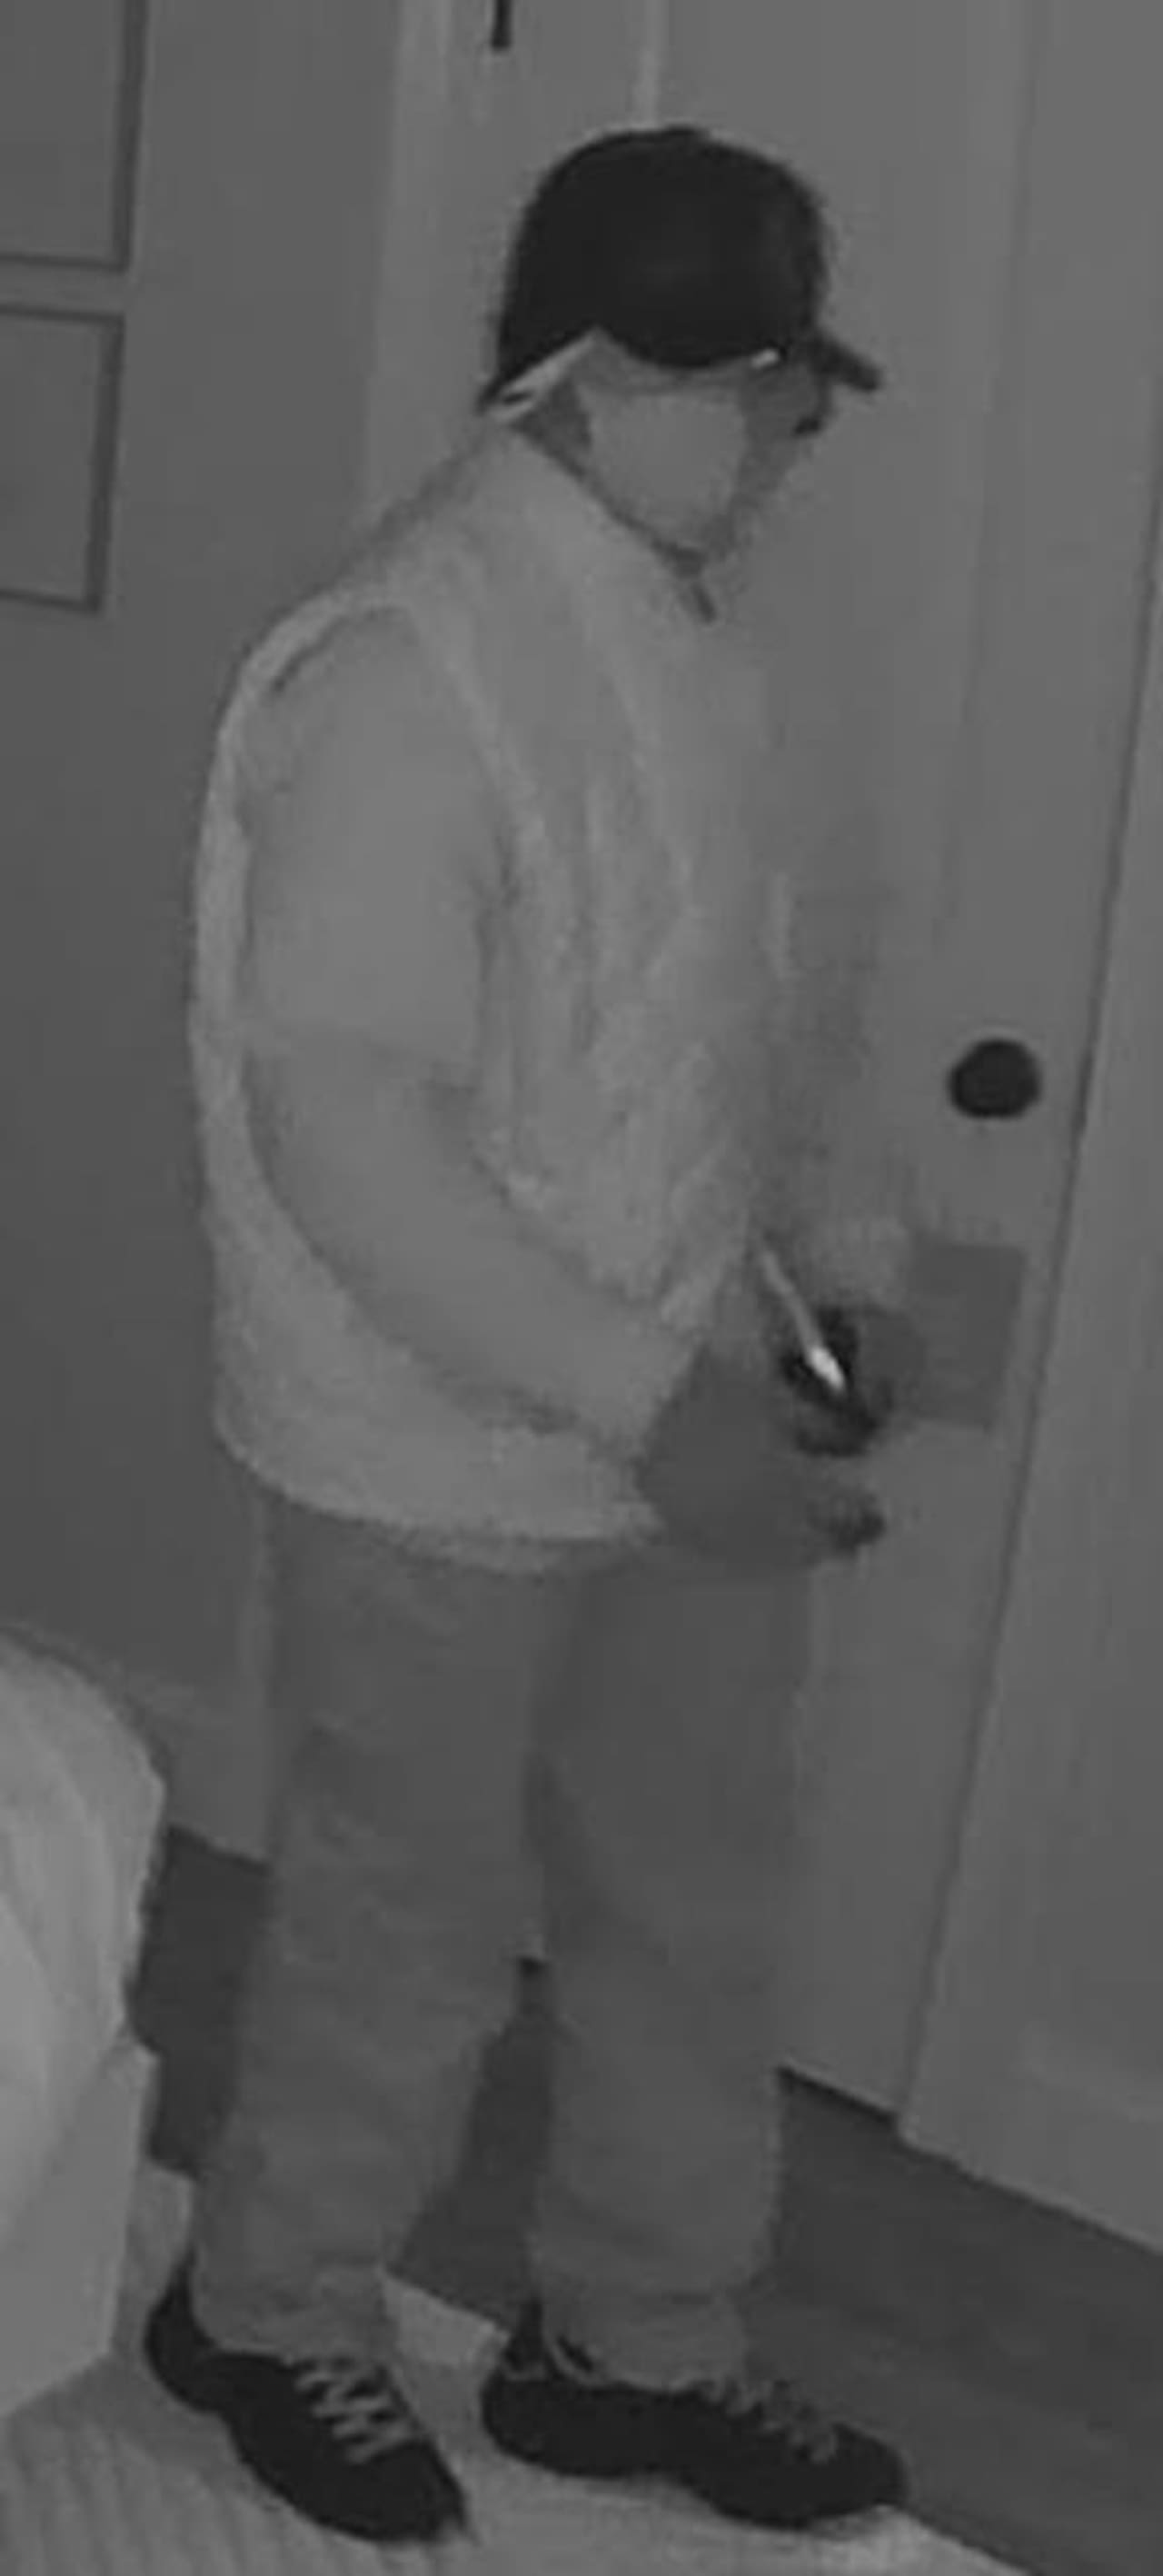 Know him? Police are asking the public for help identifying a man wanted for an alleged burglary.